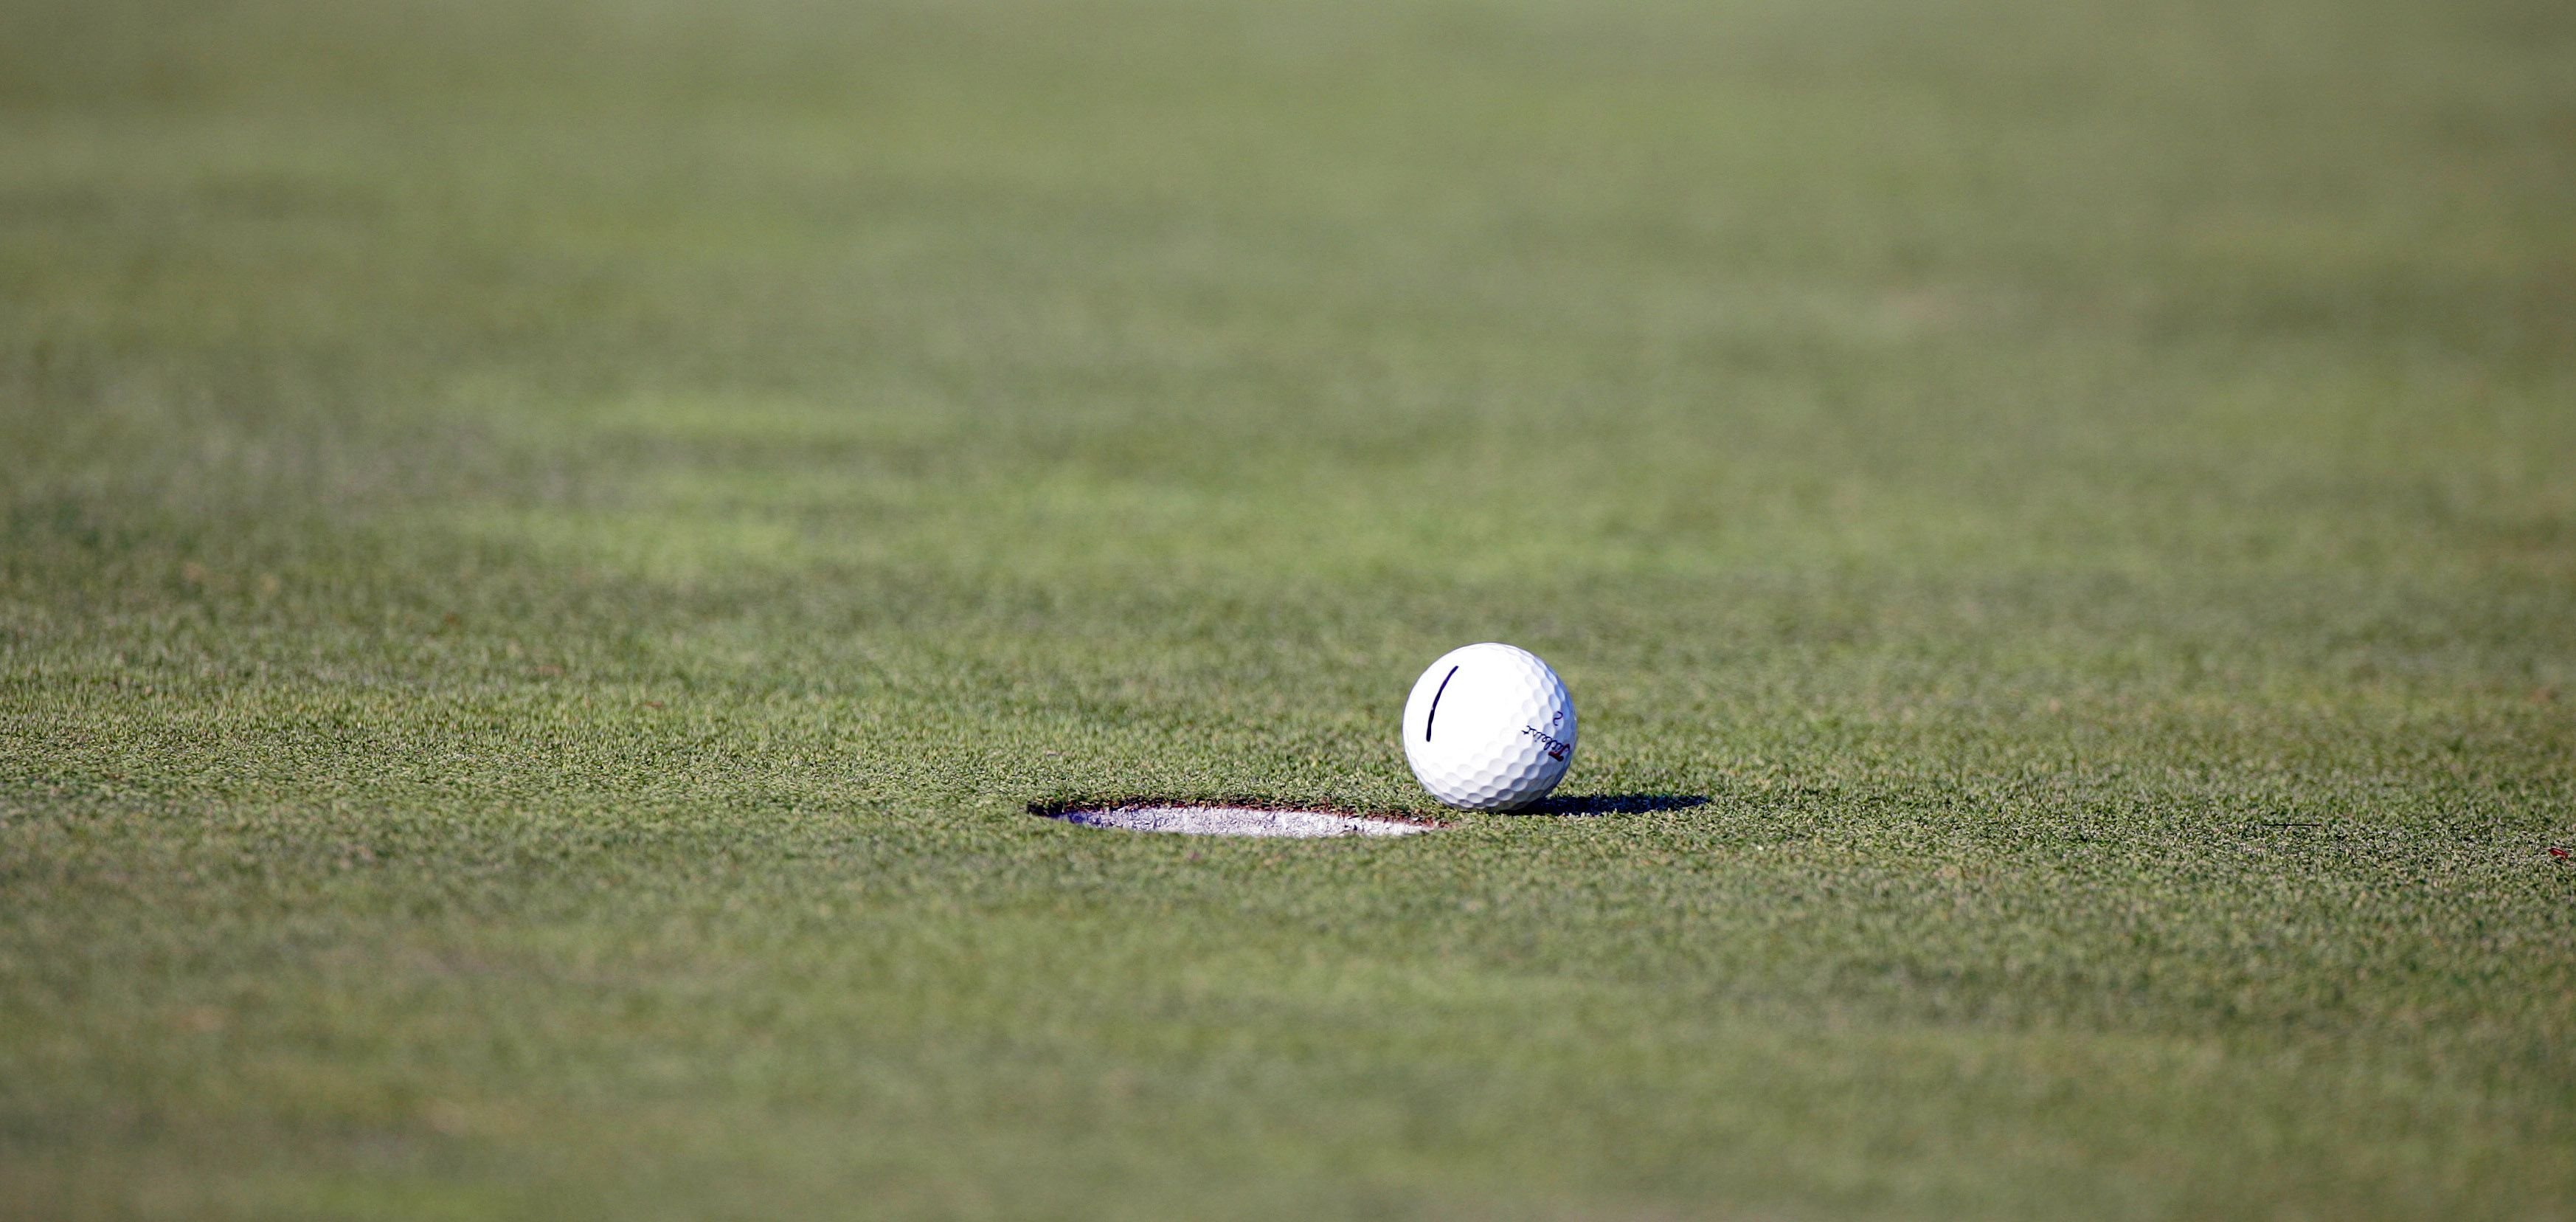 A golf ball falls short during the final round of the 2005 Bell Canadian Open, September 11,2005, held at Shaughnessy Golf & Country Club, Vancouver, B.C. He finished at -5 for the tournament. | Source: Getty Images